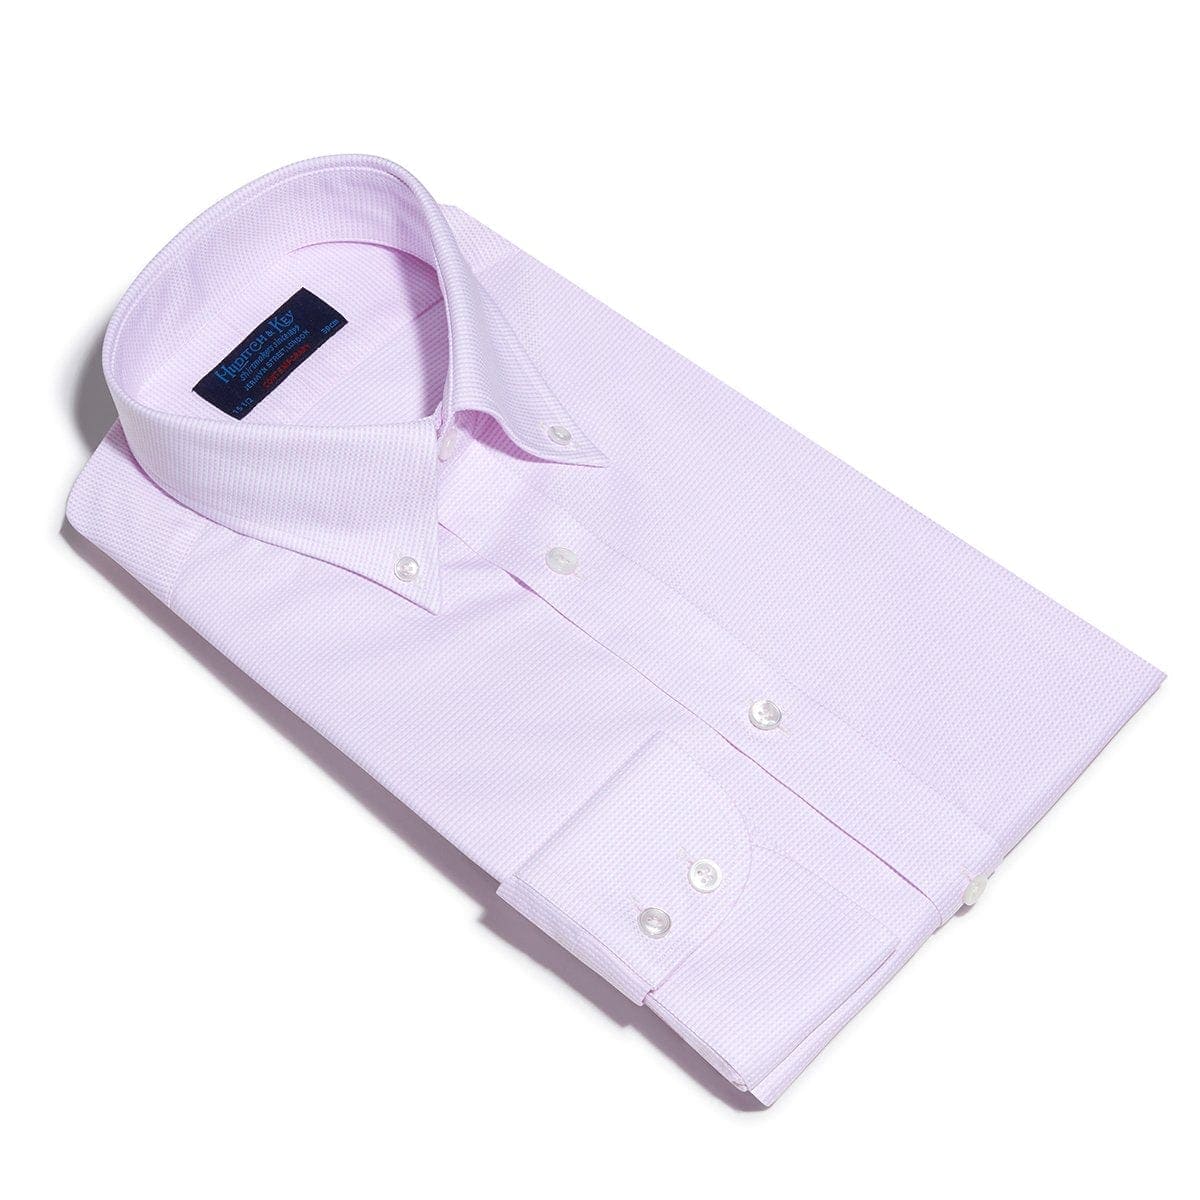 Contemporary Fit, Button Down Collar, Two Button Cuff Shirt In White & Pink Micro Check